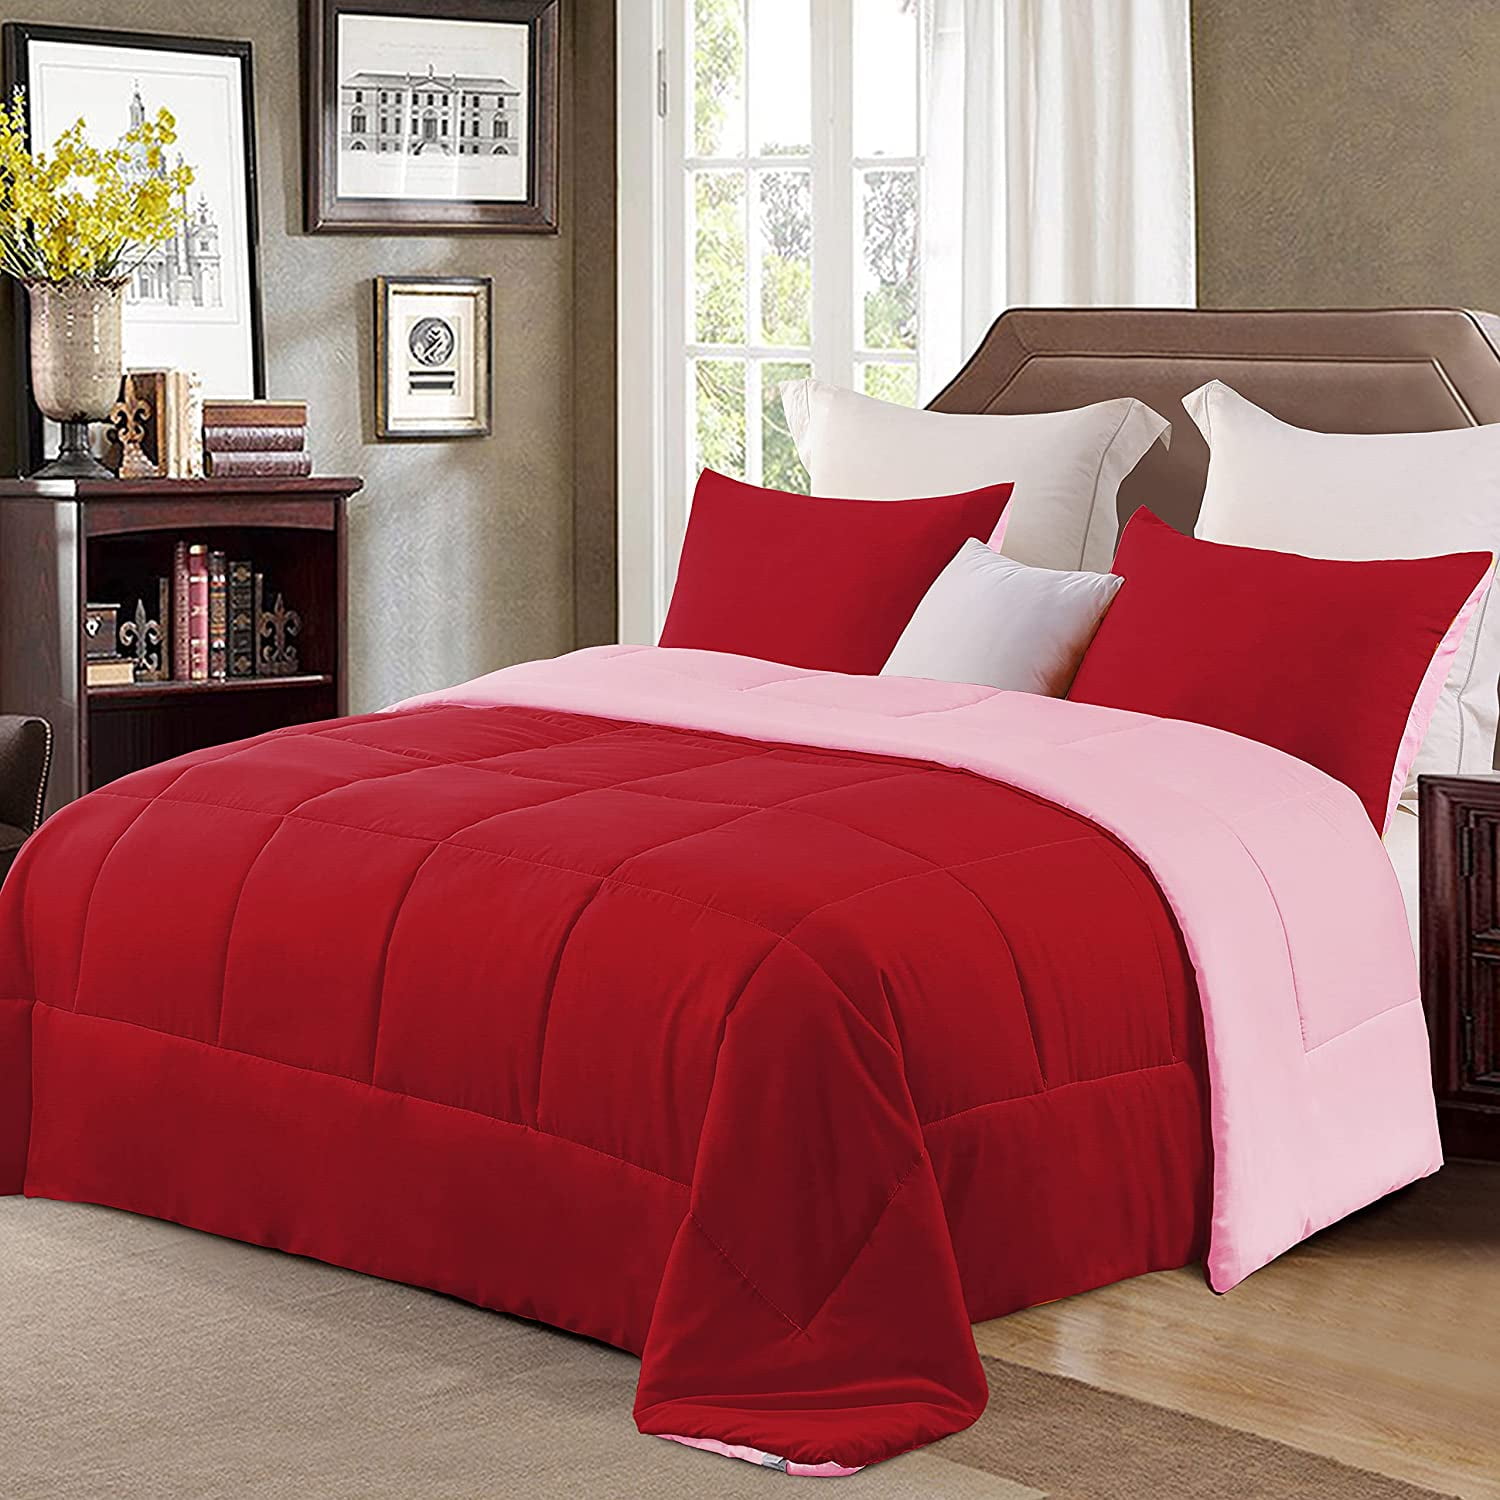 Shatex 7 Piece Red Luxury Bedding Sets - Oversized Bedroom Comforters ,  Queen J 22162V RED Q - The Home Depot